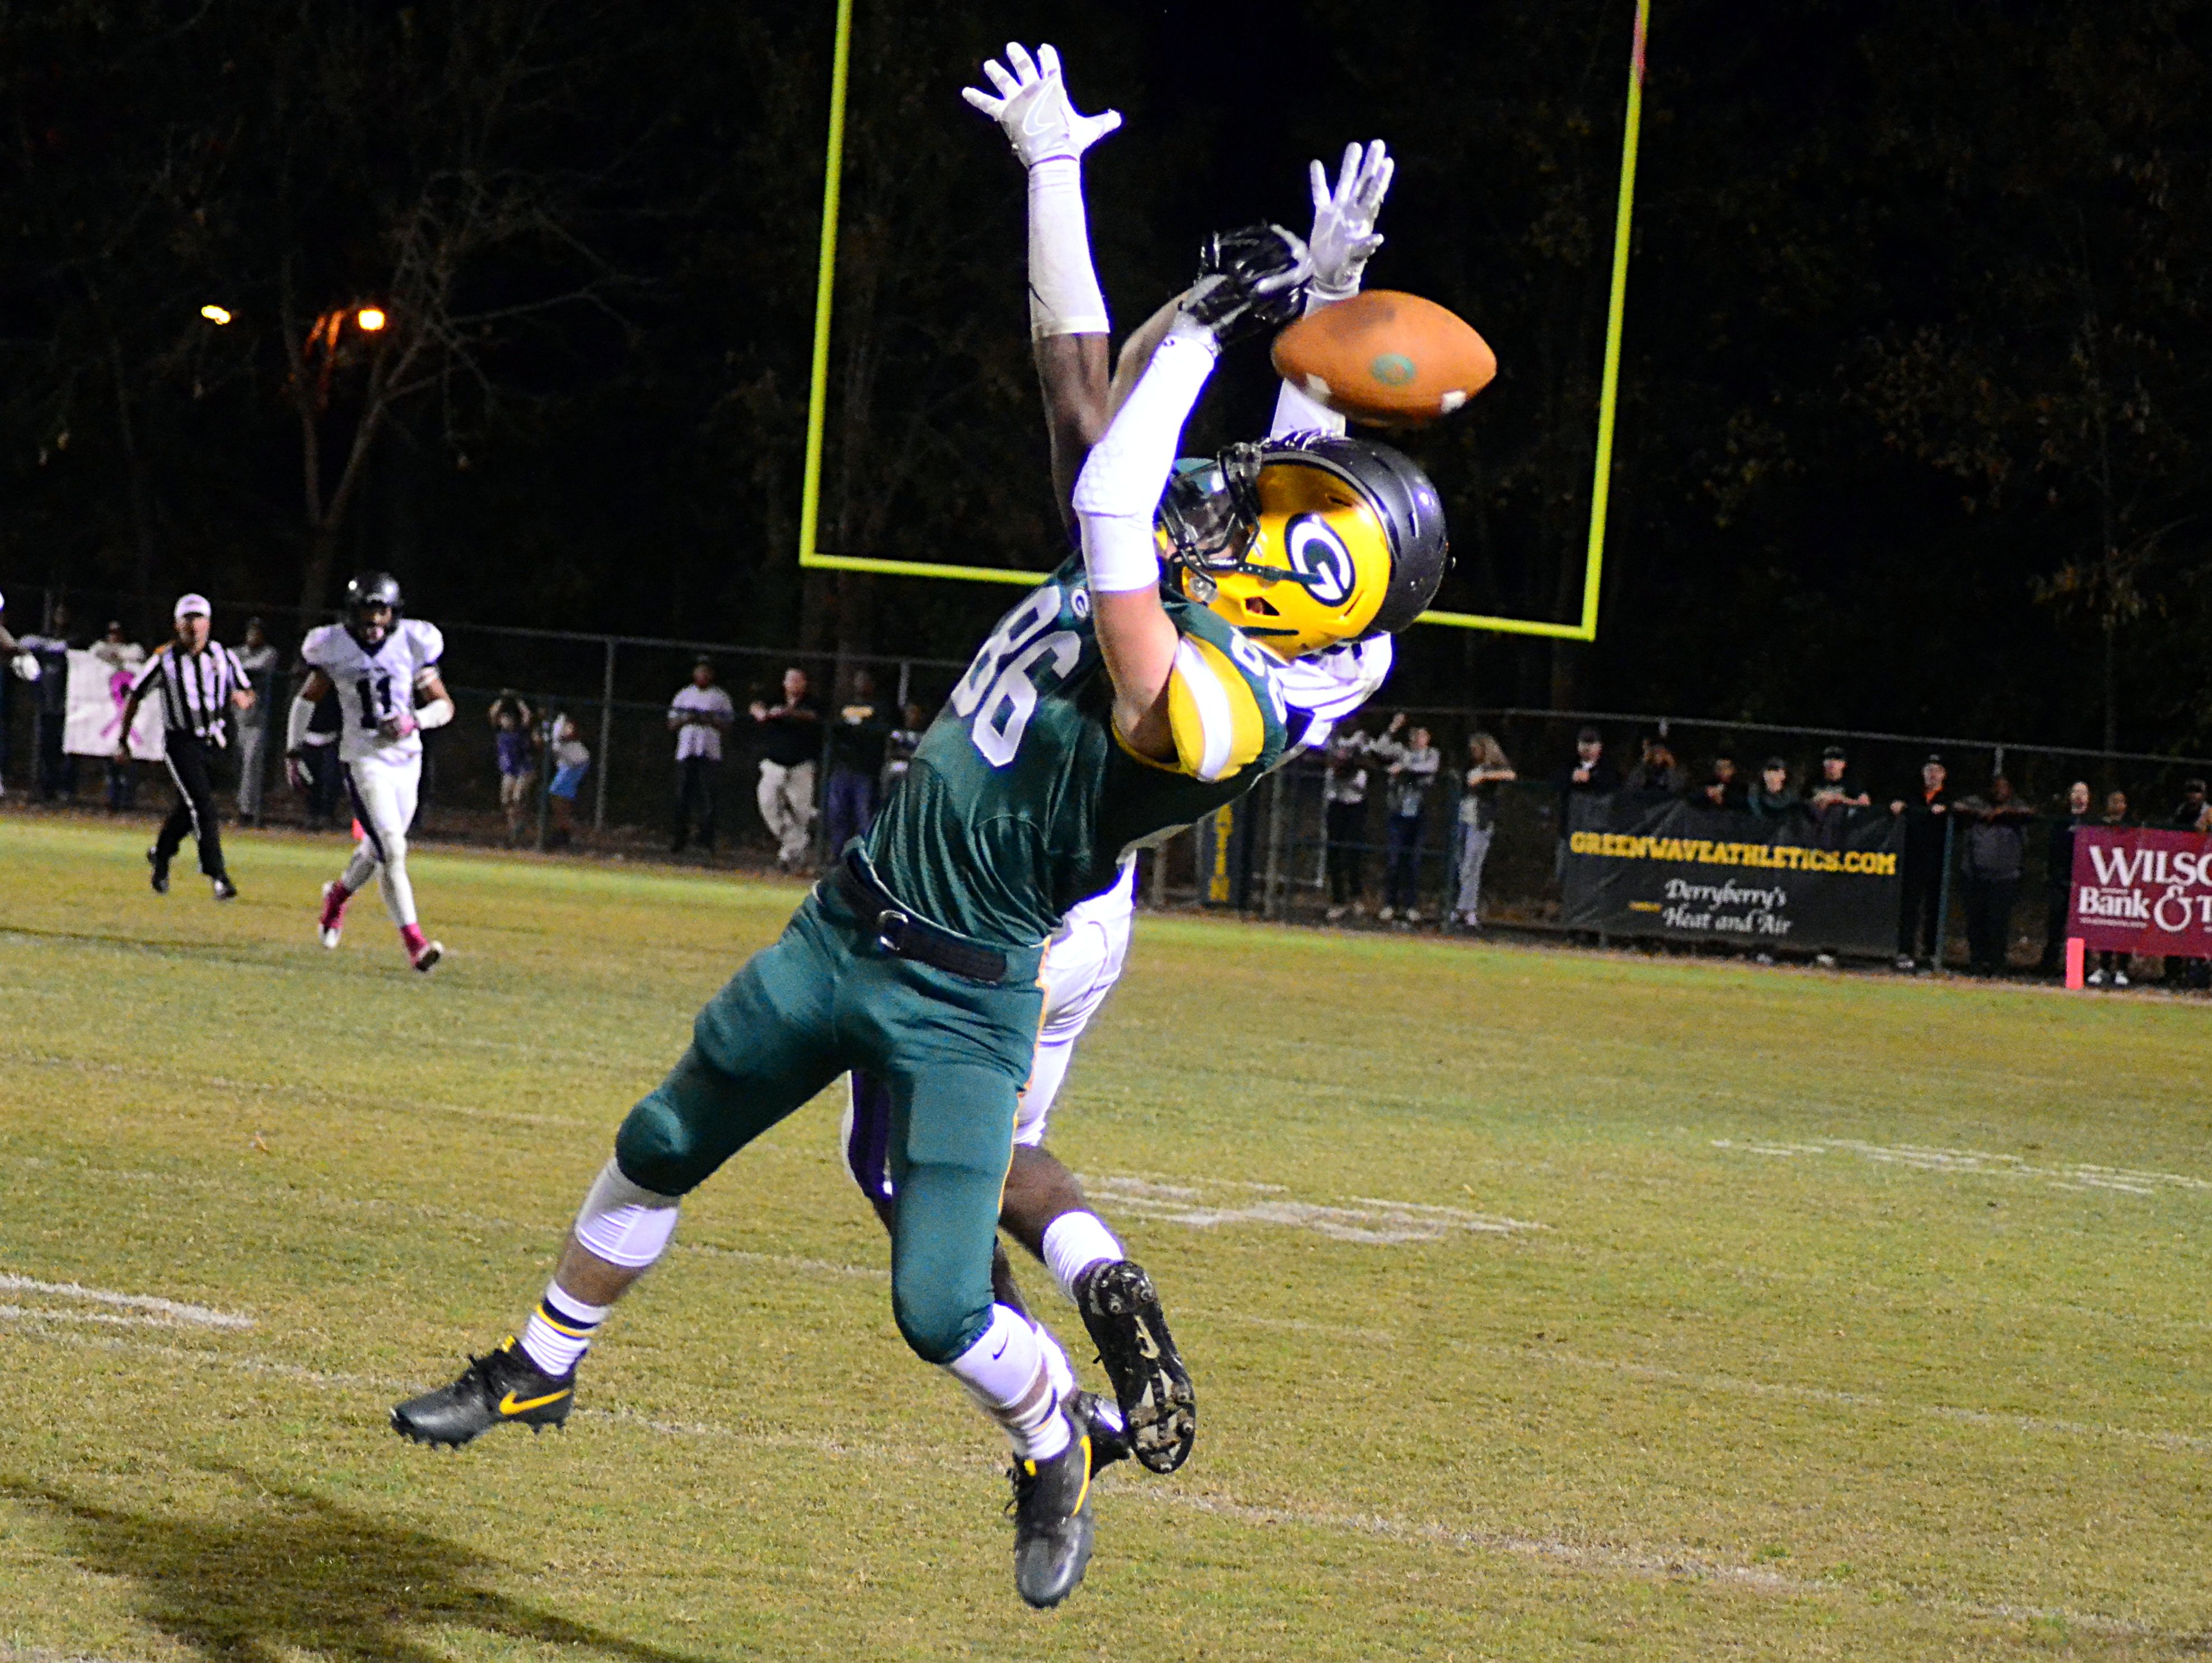 Gallatin High senior Matthew Knight has a pass knocked away from him by a Cane Ridge defender during third-quarter action.